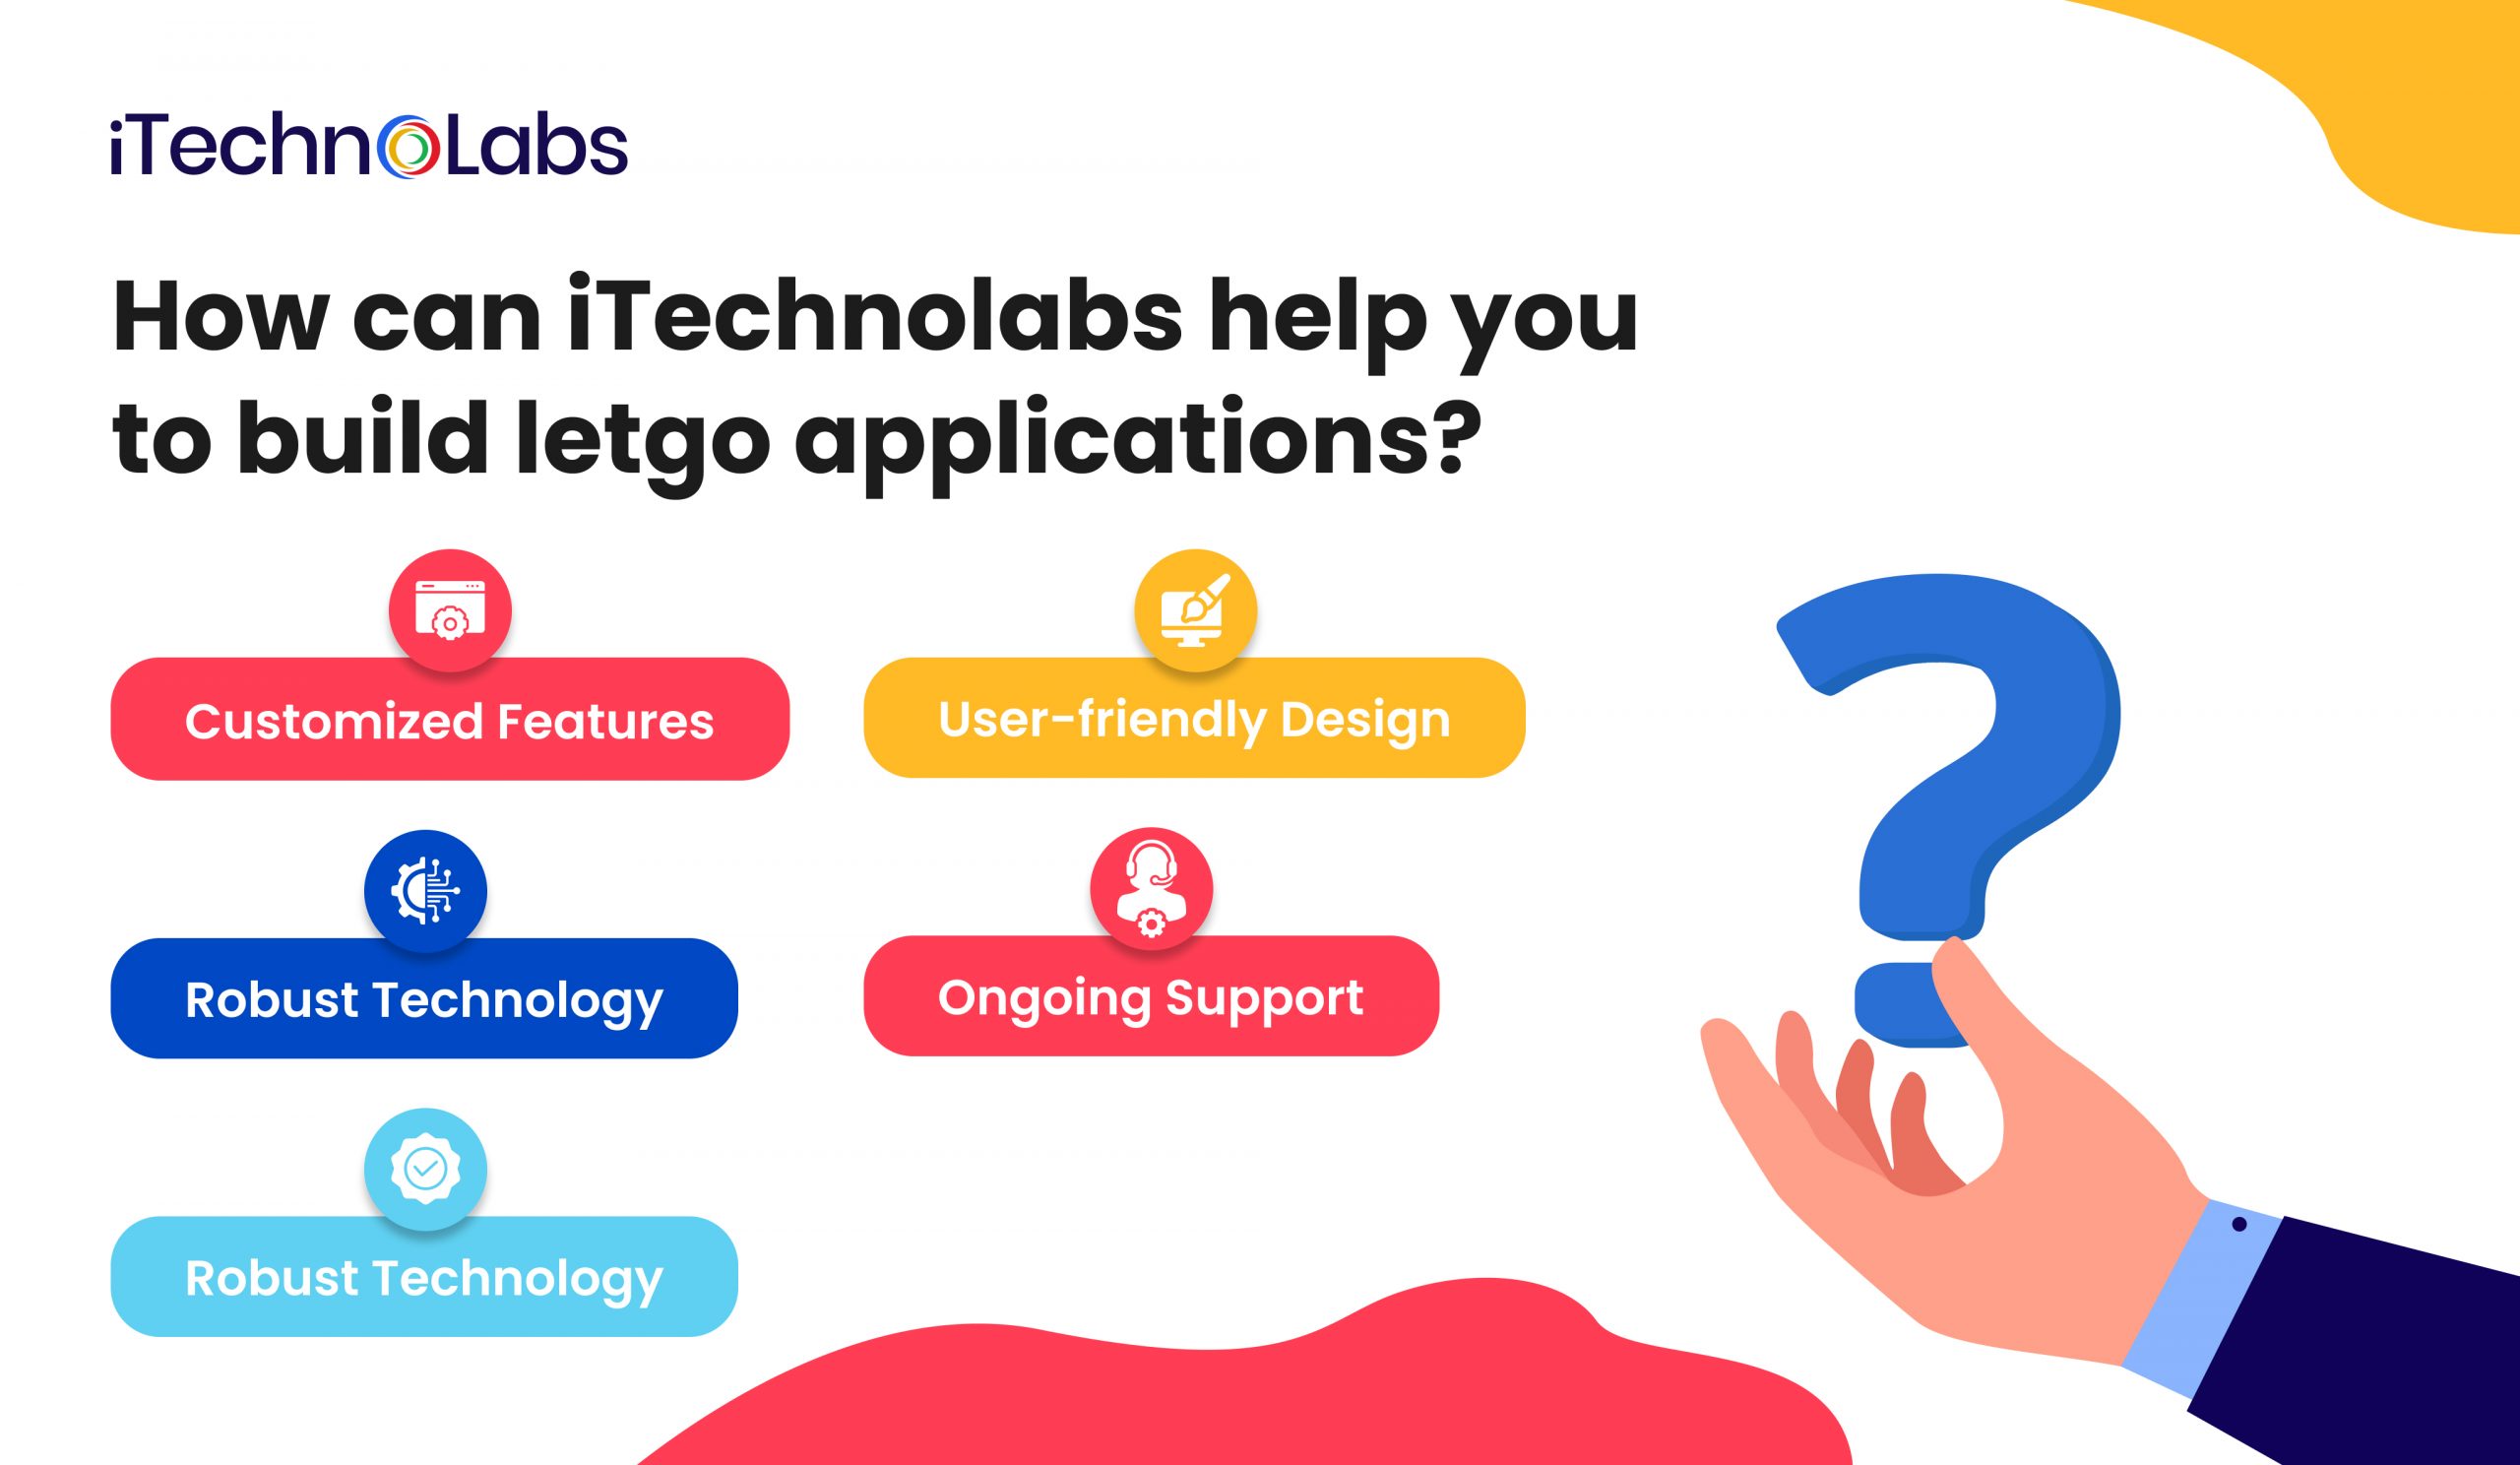 iTechnolabs-How can iTechnolabs help you to build letgo applications?